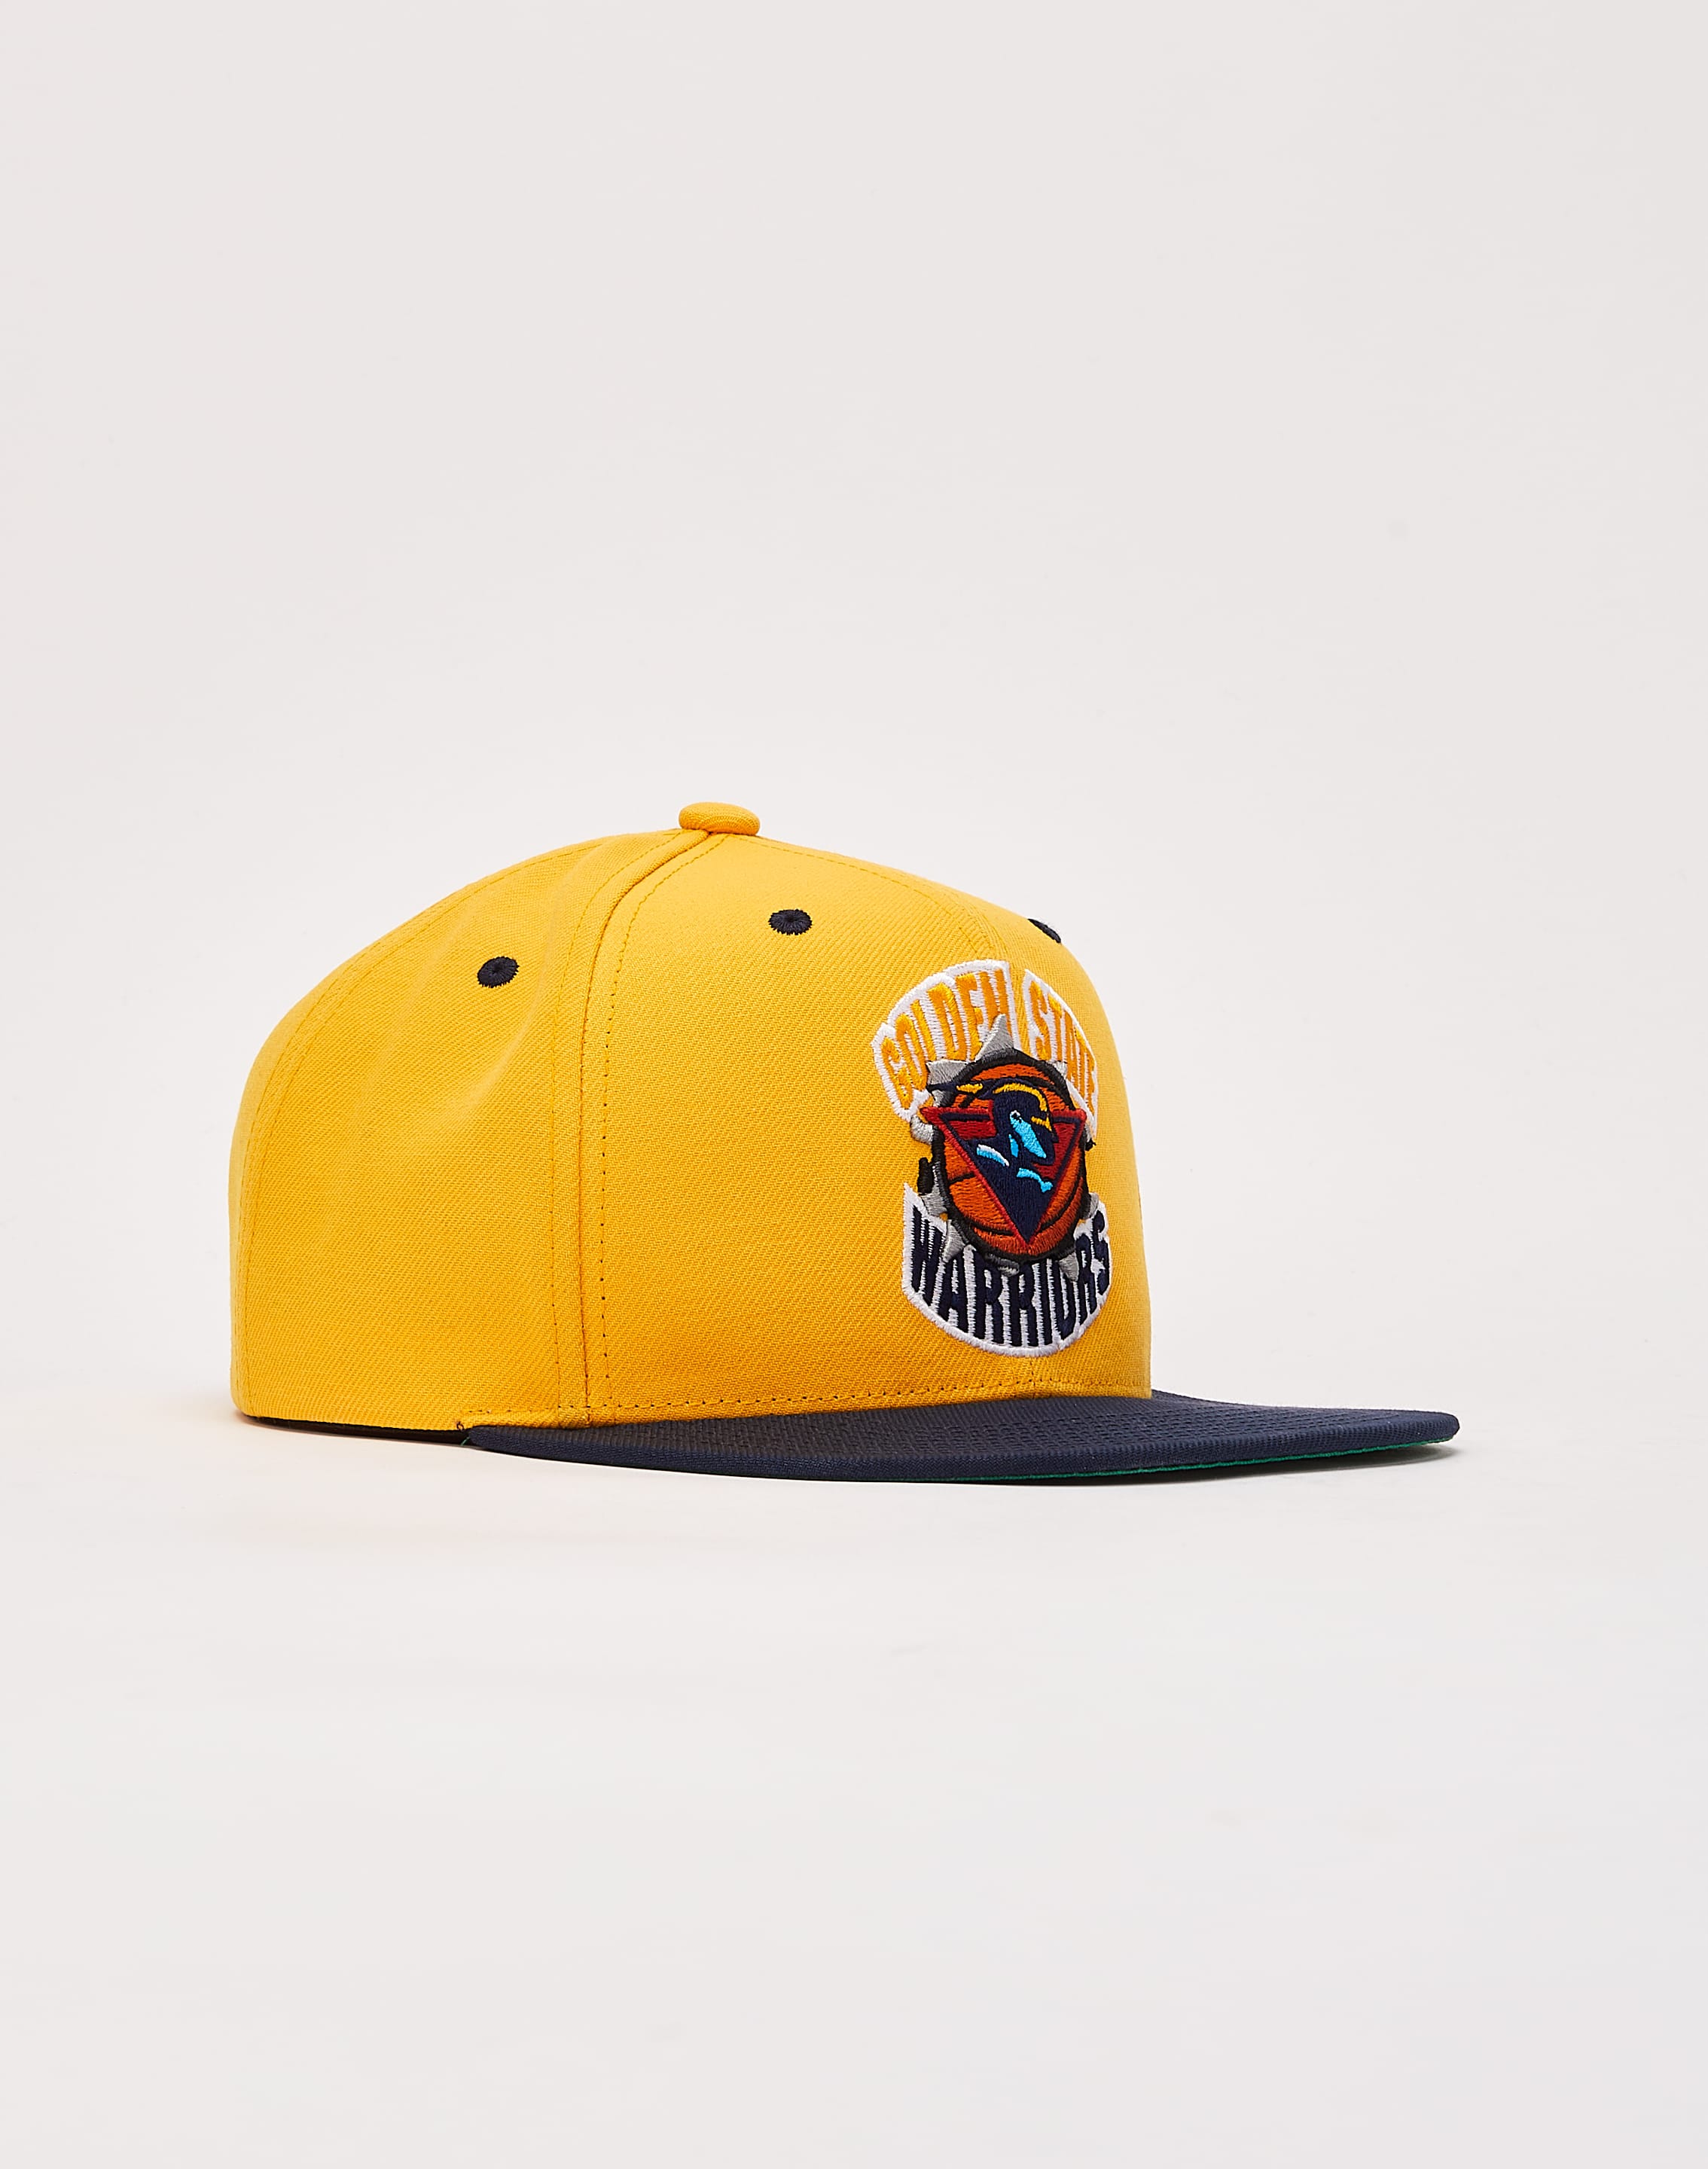 golden state warriors mitchell and ness snapback